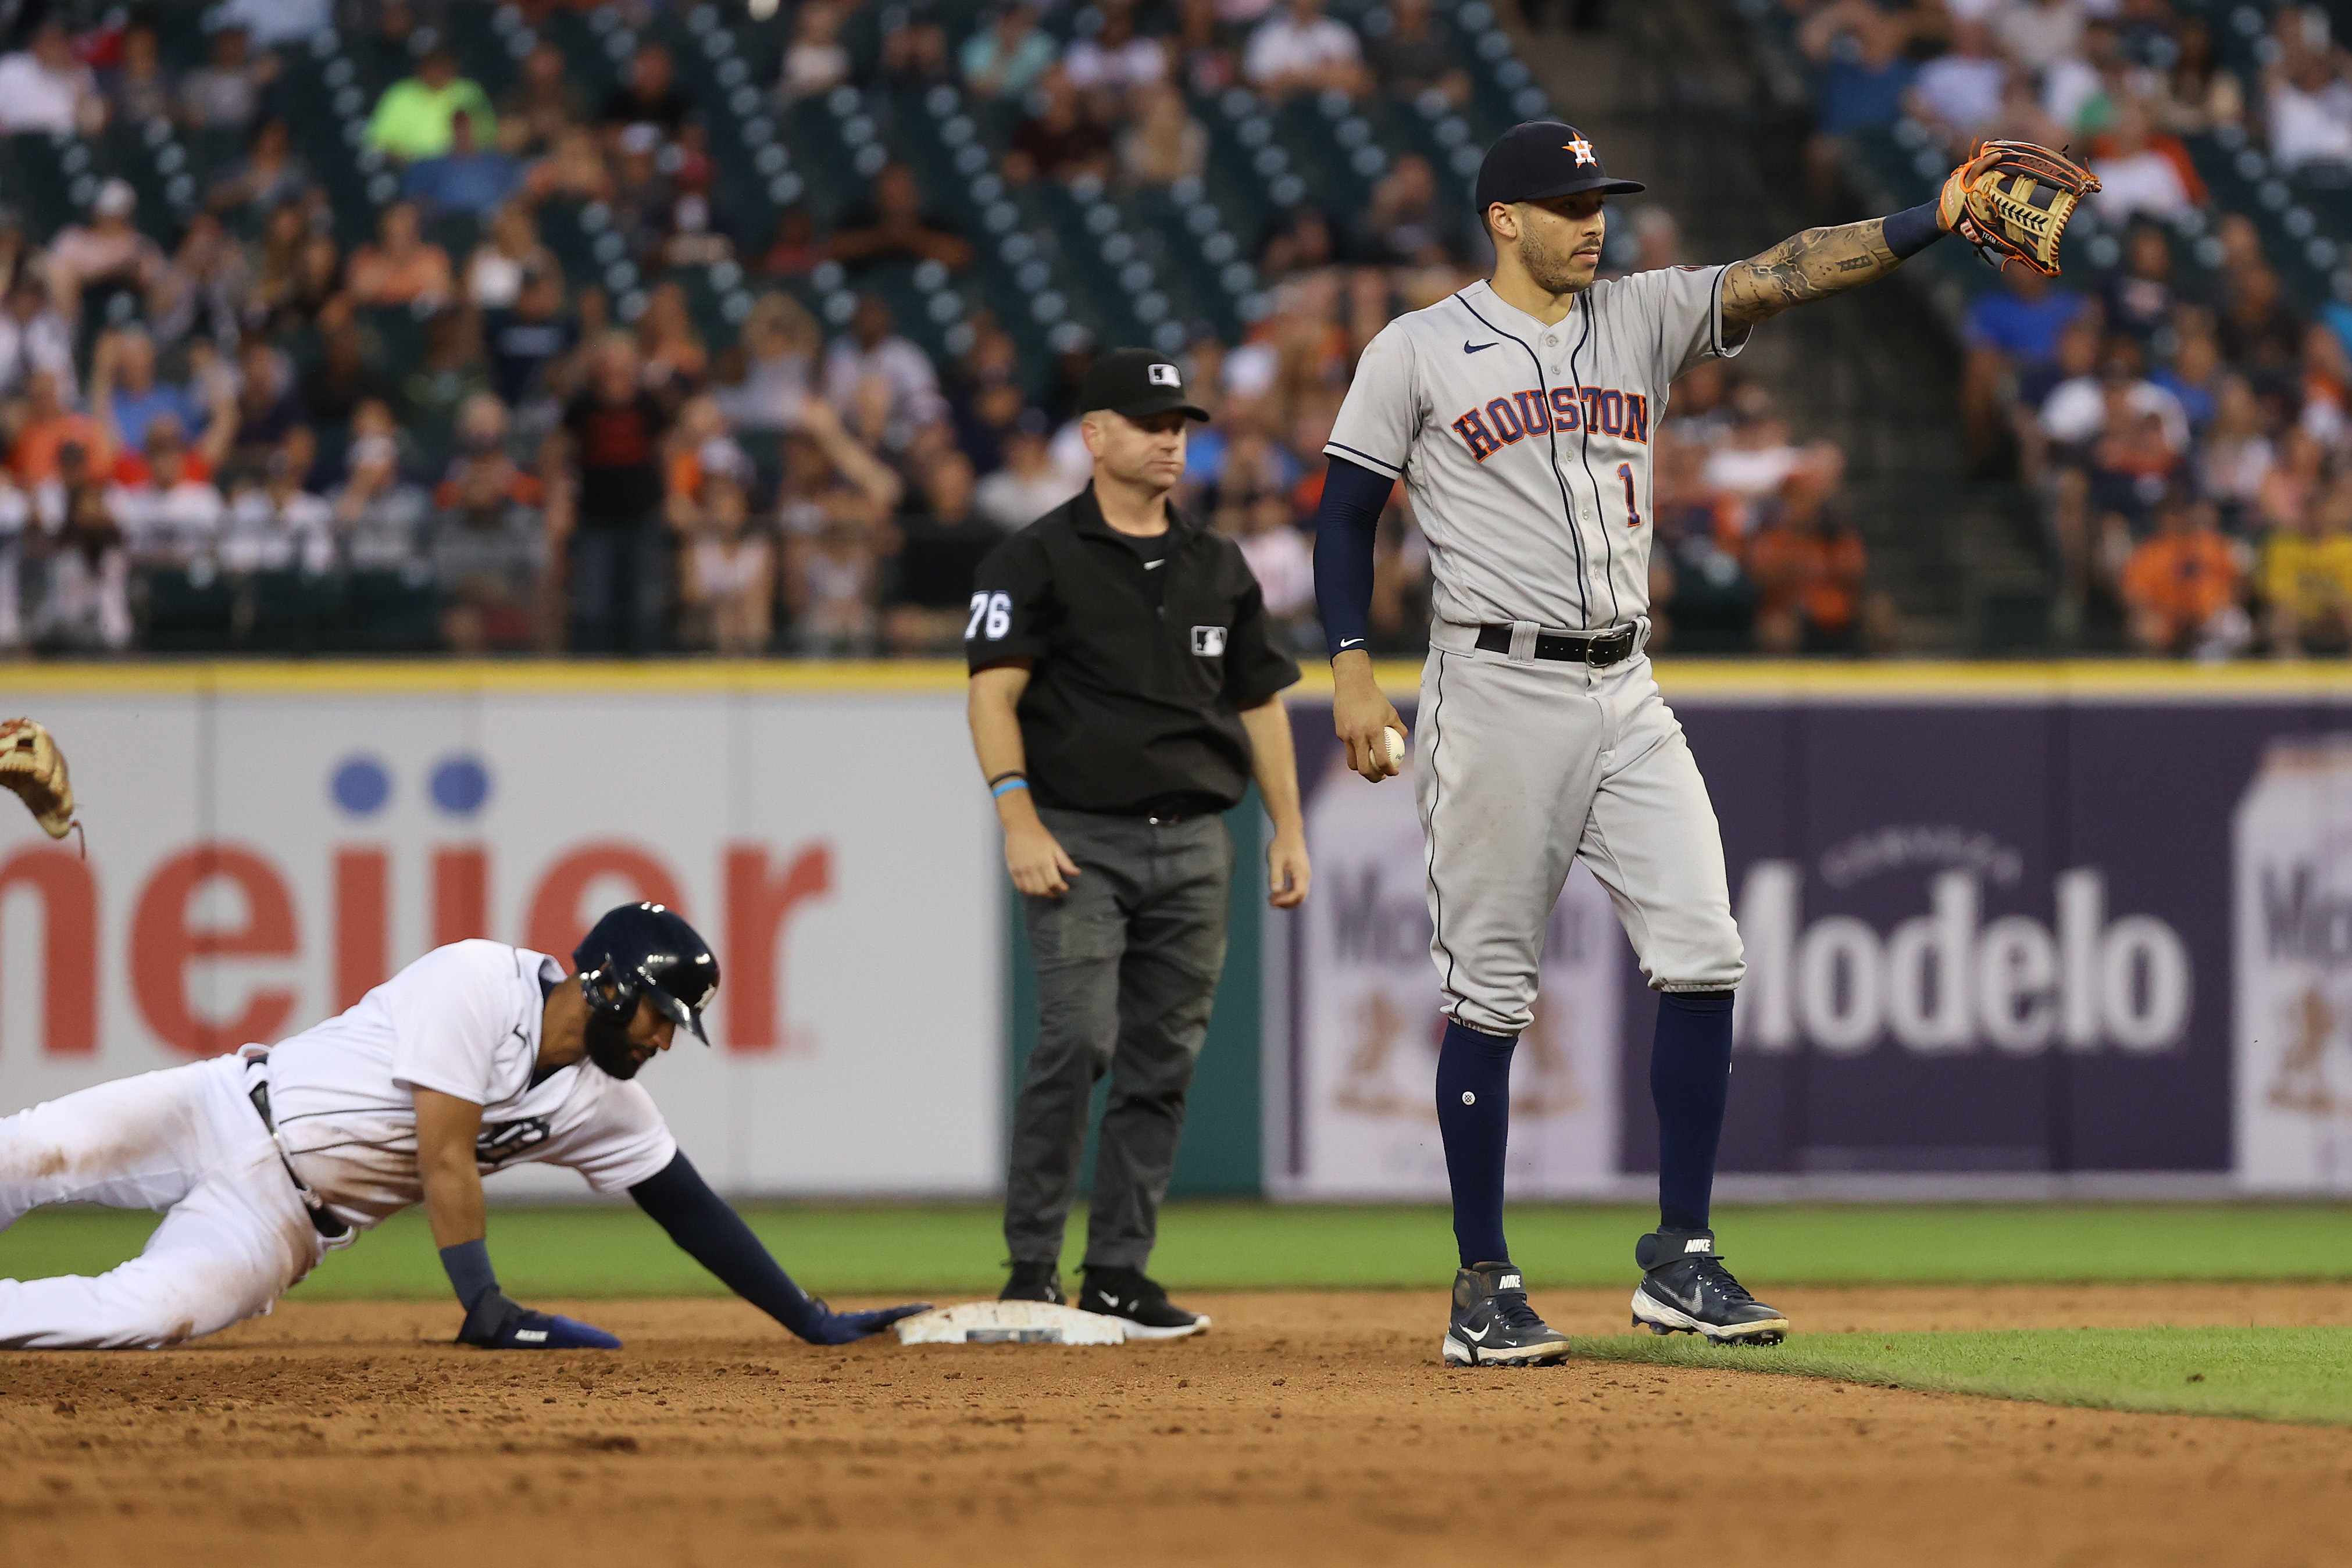 Carlos Correa Finally Finds A Team, Staying Put With Minnesota Twins